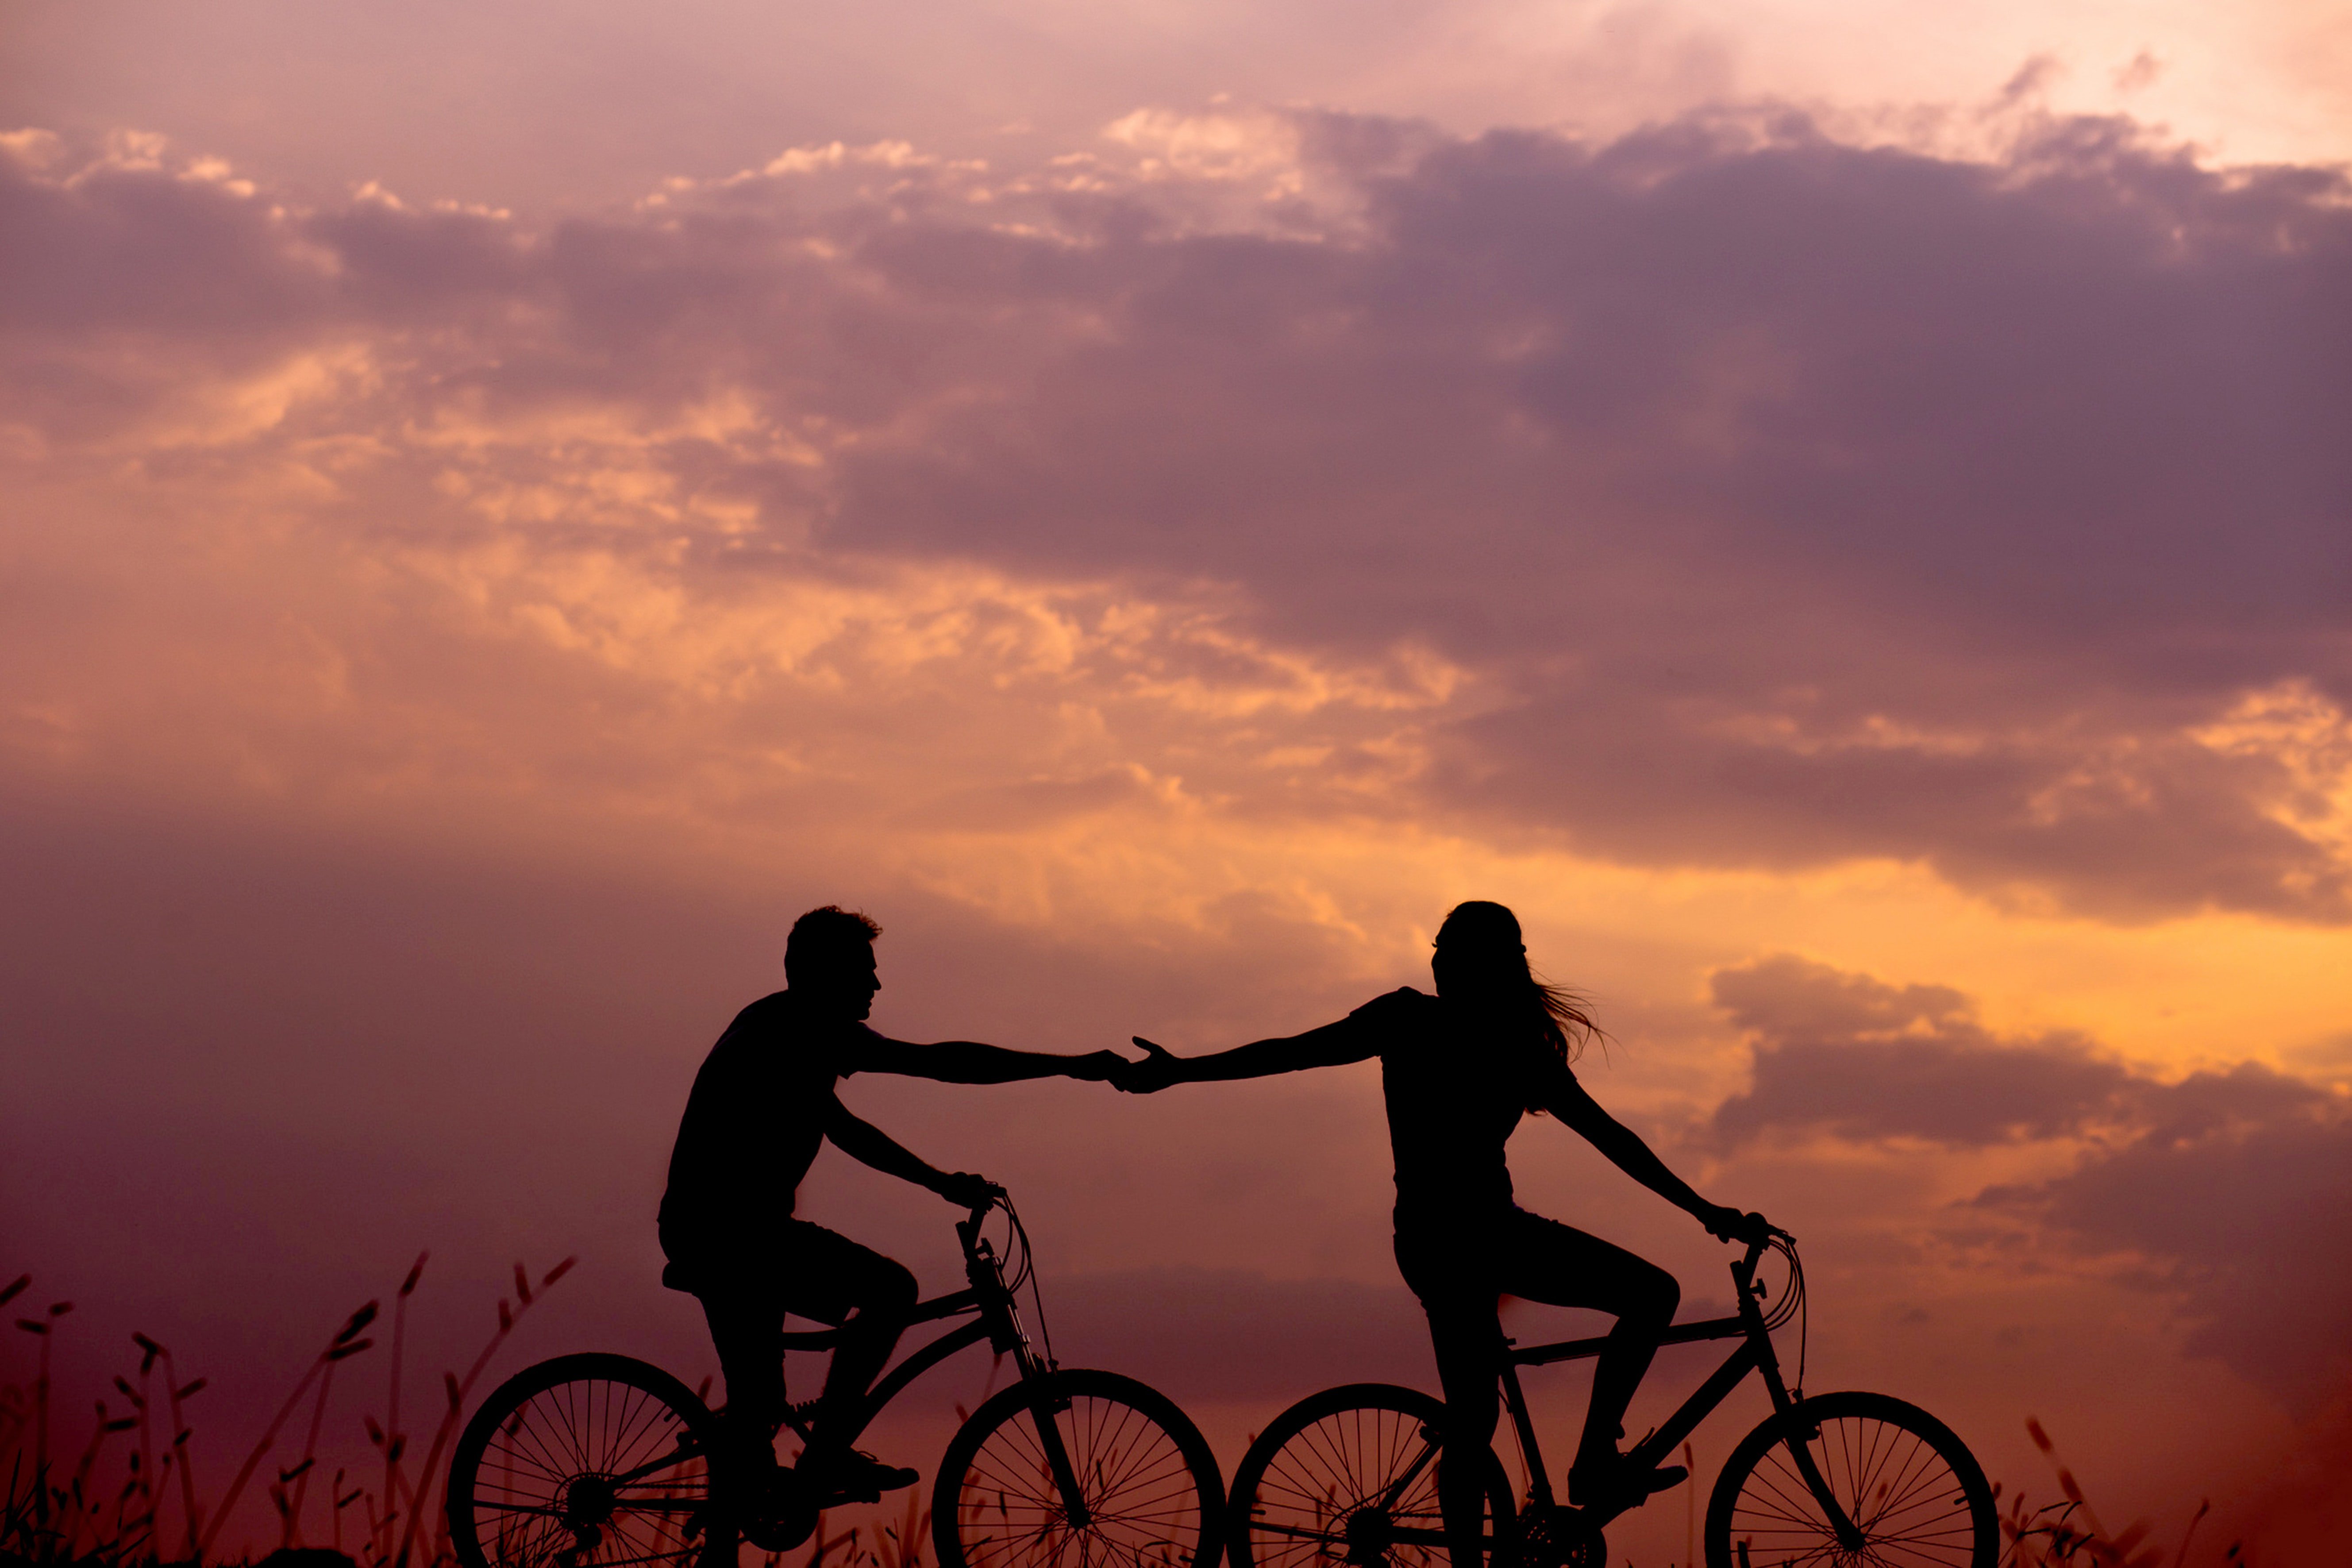 two people biking holding hands in the sunset